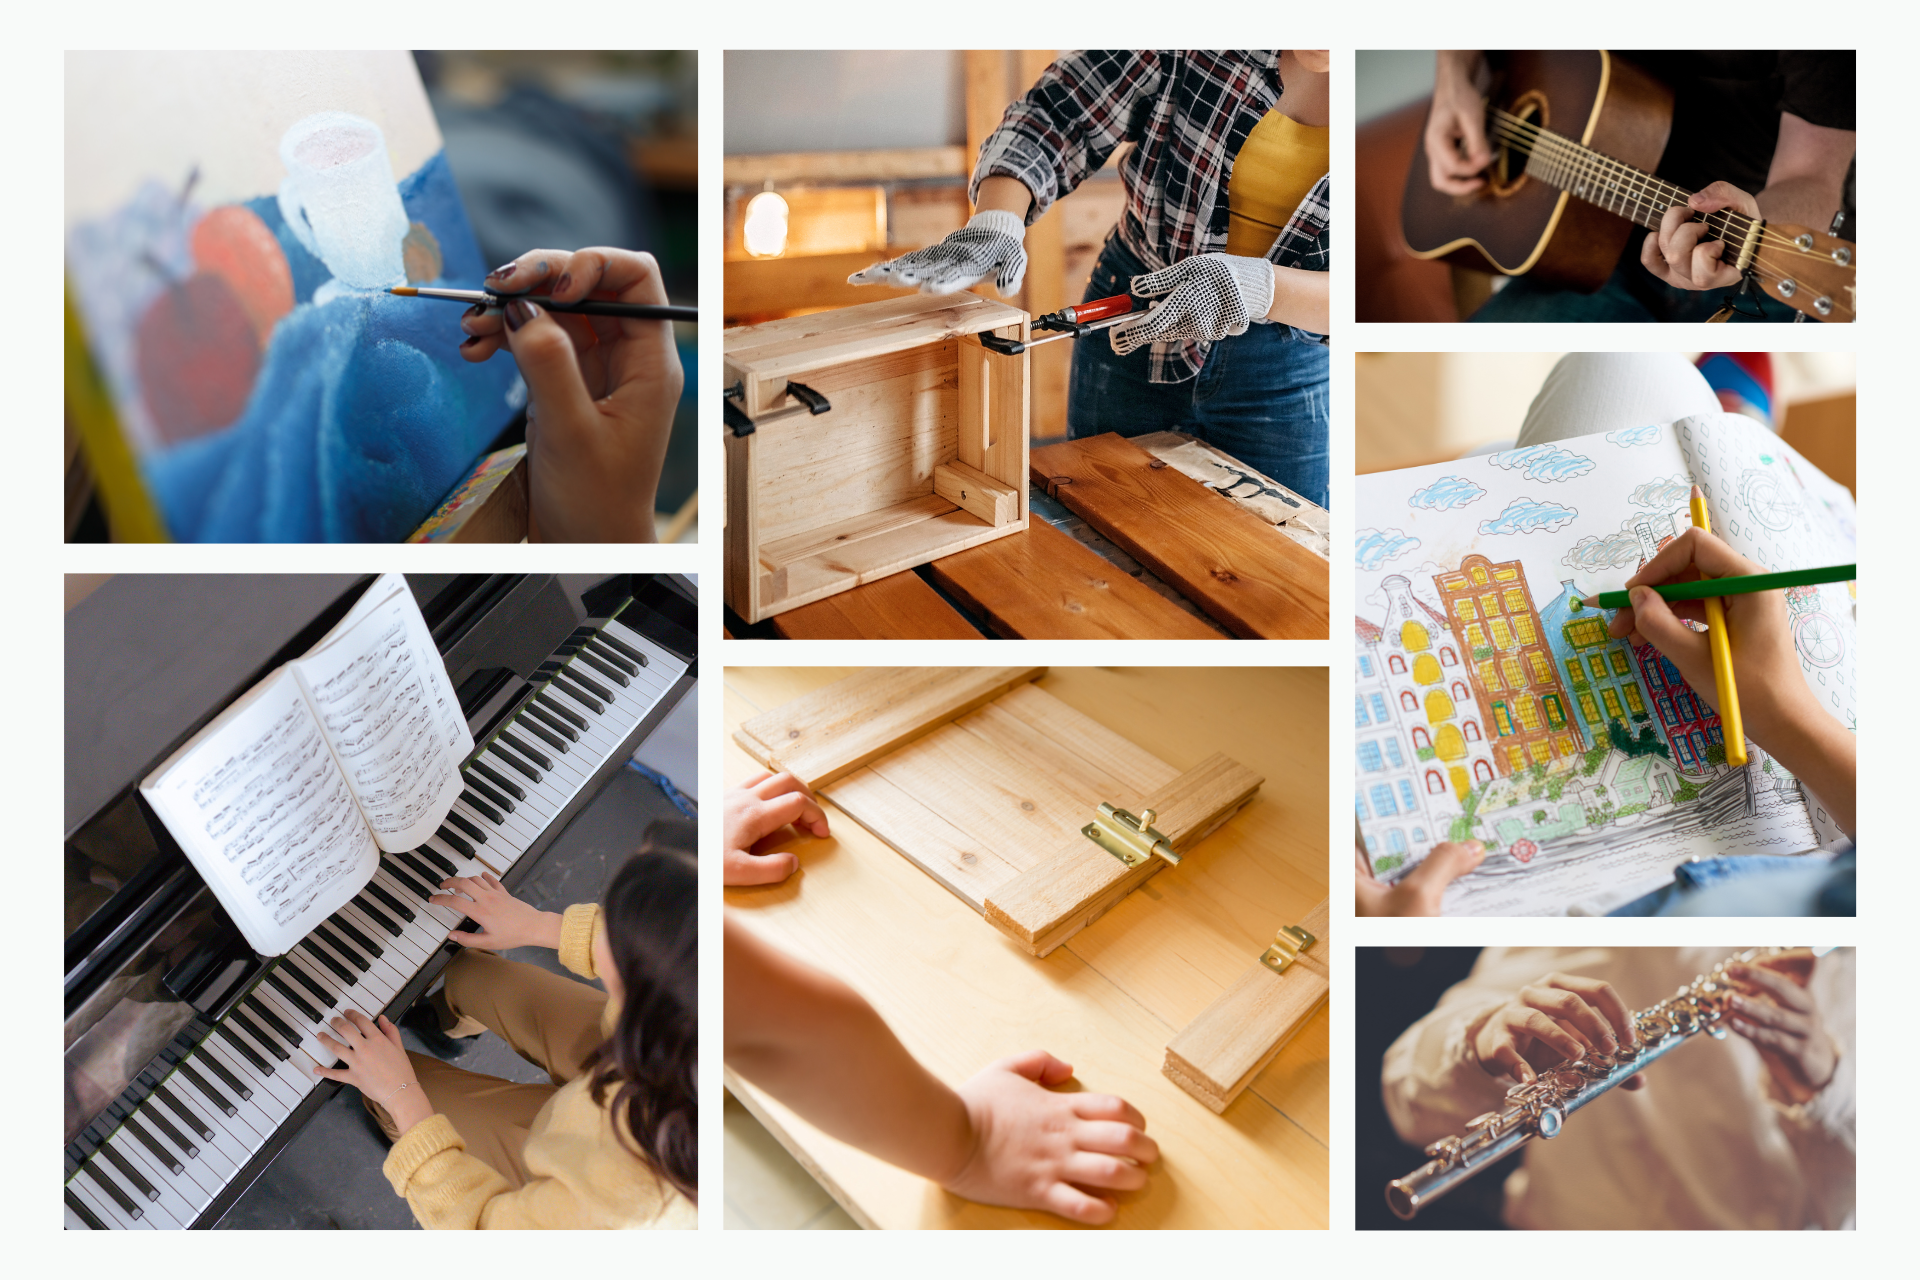 An image showing Creative Hobbies That Encourage a Feeling of Calm